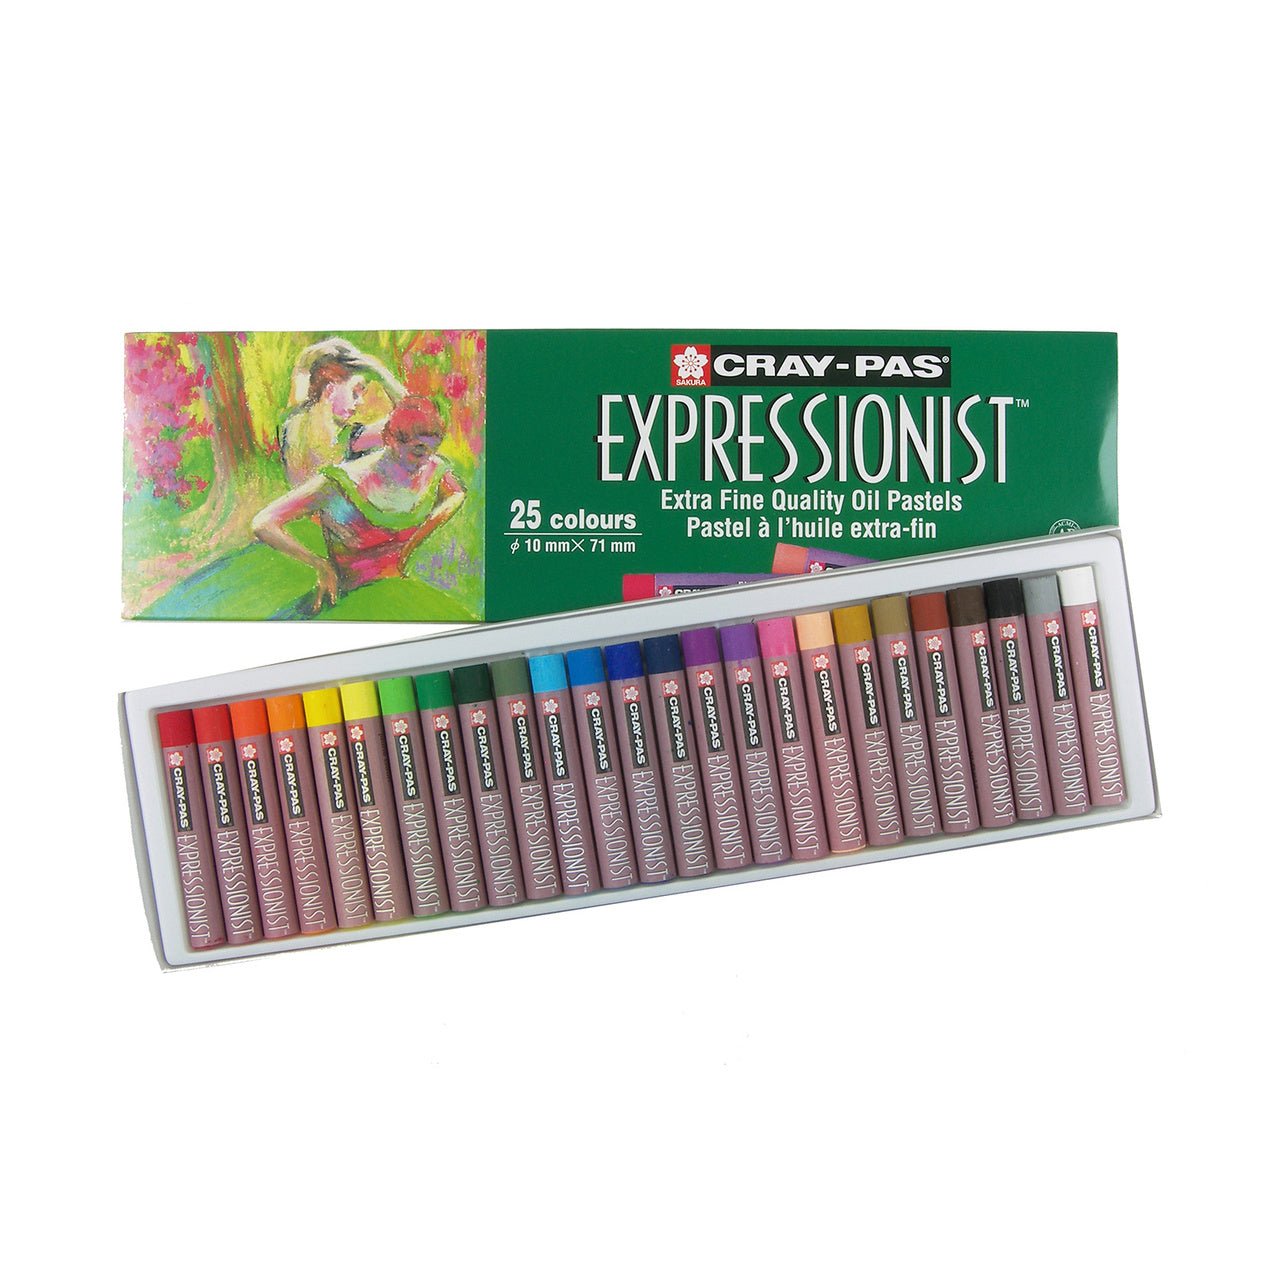 Oil Pastels: Crayola Portfolio Watersoluble Oil Pastels (review